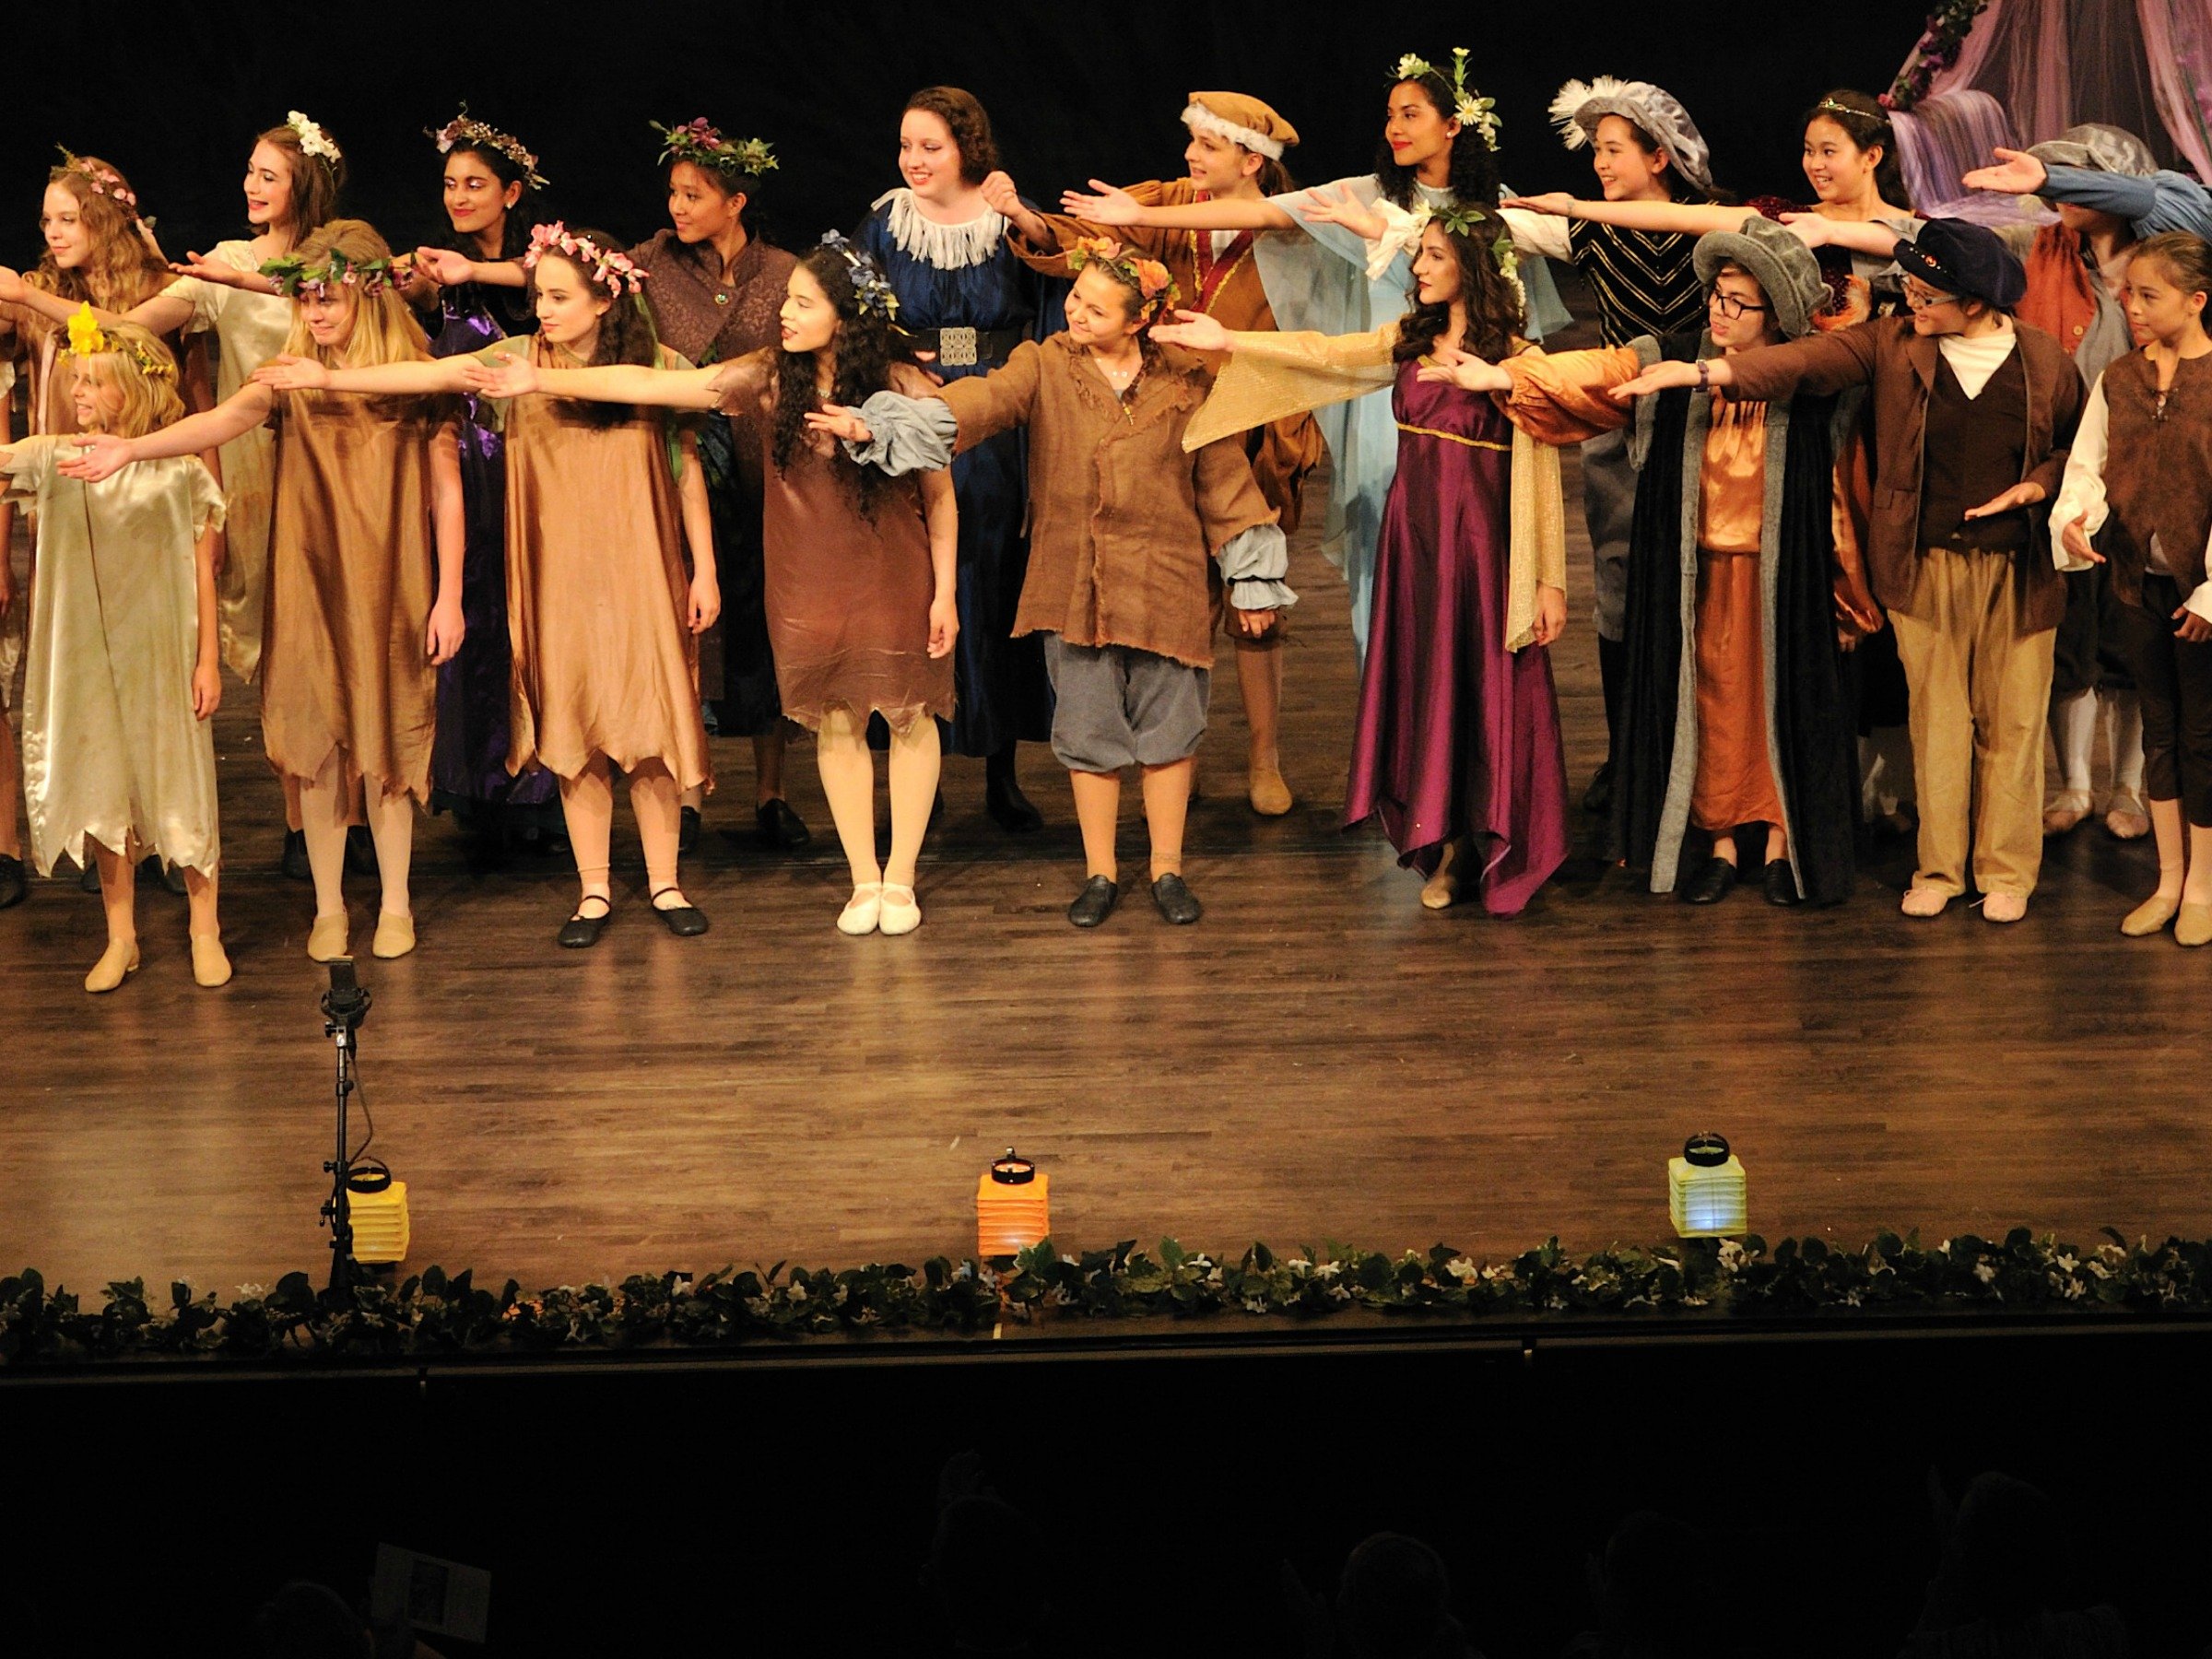 Summer Conservatory cast on stage with their arms out to their right